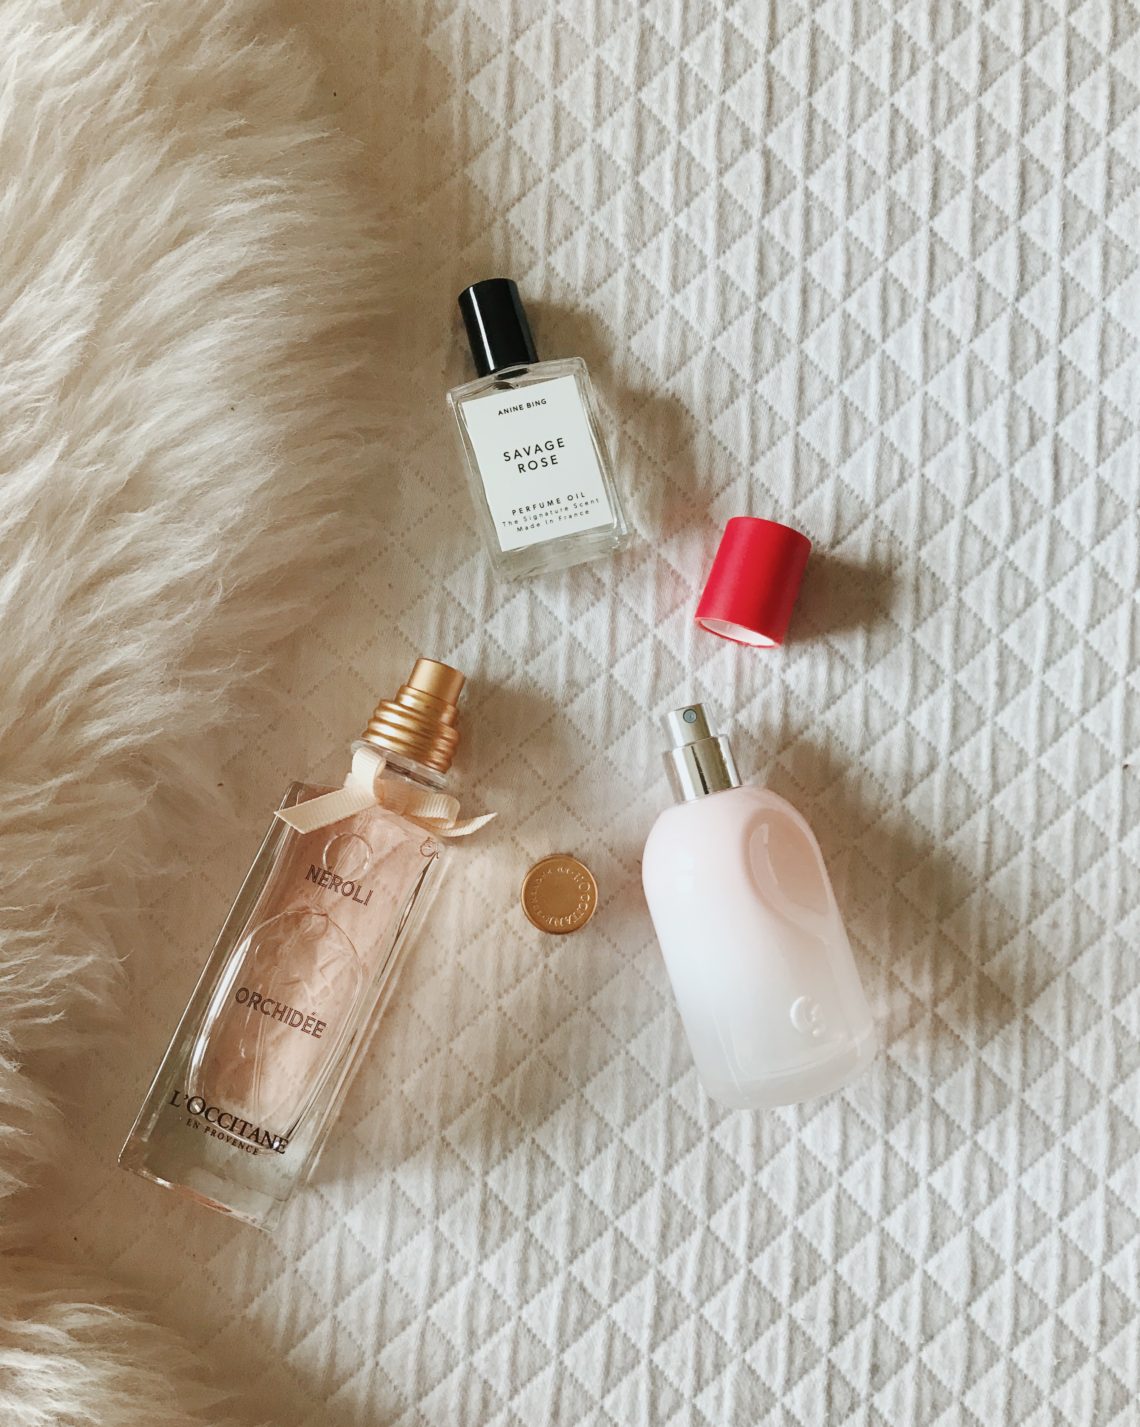 Fragrances: Jumping into the New Year with Glossier, L'Occitane and Anine Bing